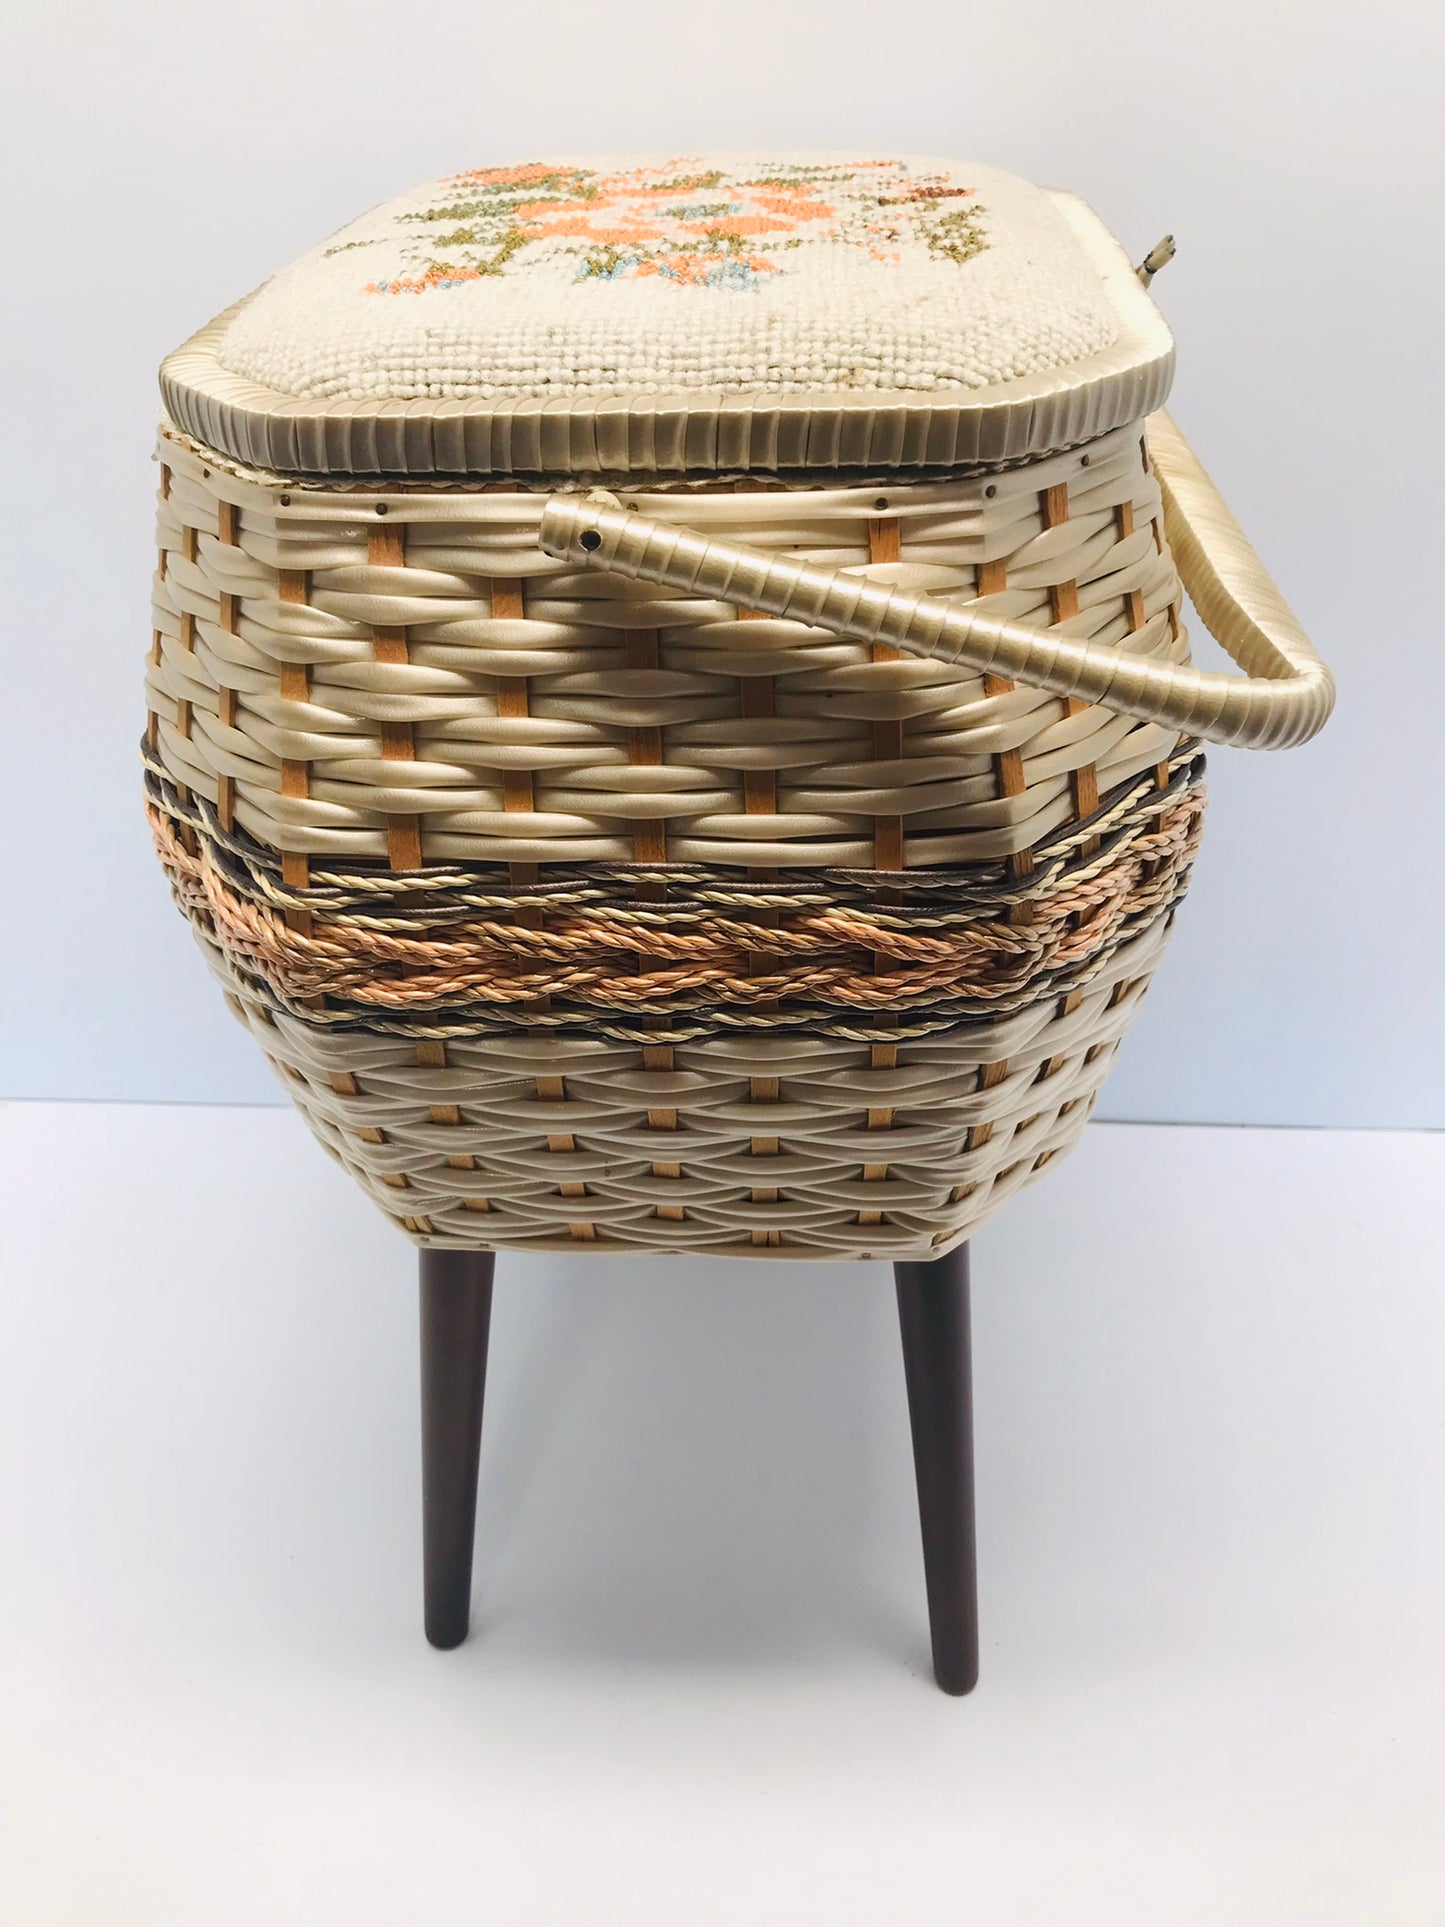 Grandma's Old Sewing or knitting Vintage Eaton's 1960's Basket 24x14x12 inch Standing Wool Wicker Chest Like New Outstanding